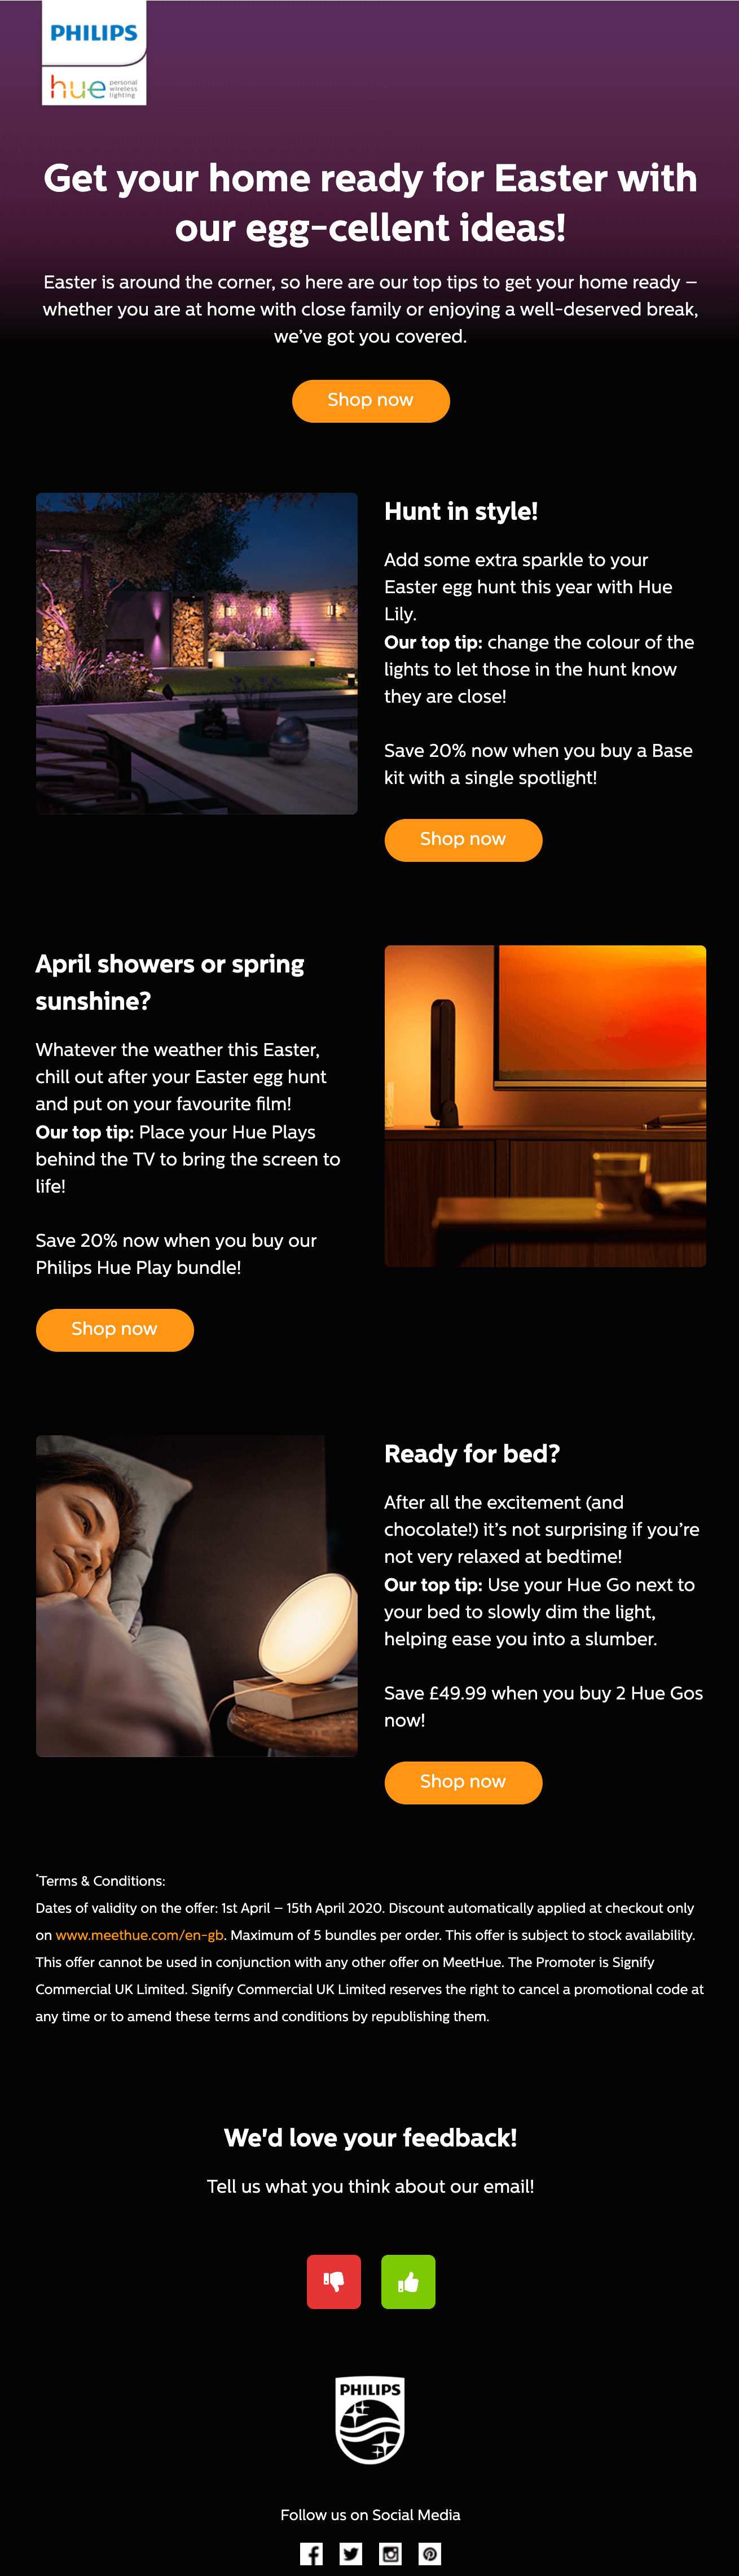 Philips-hue-easter-email